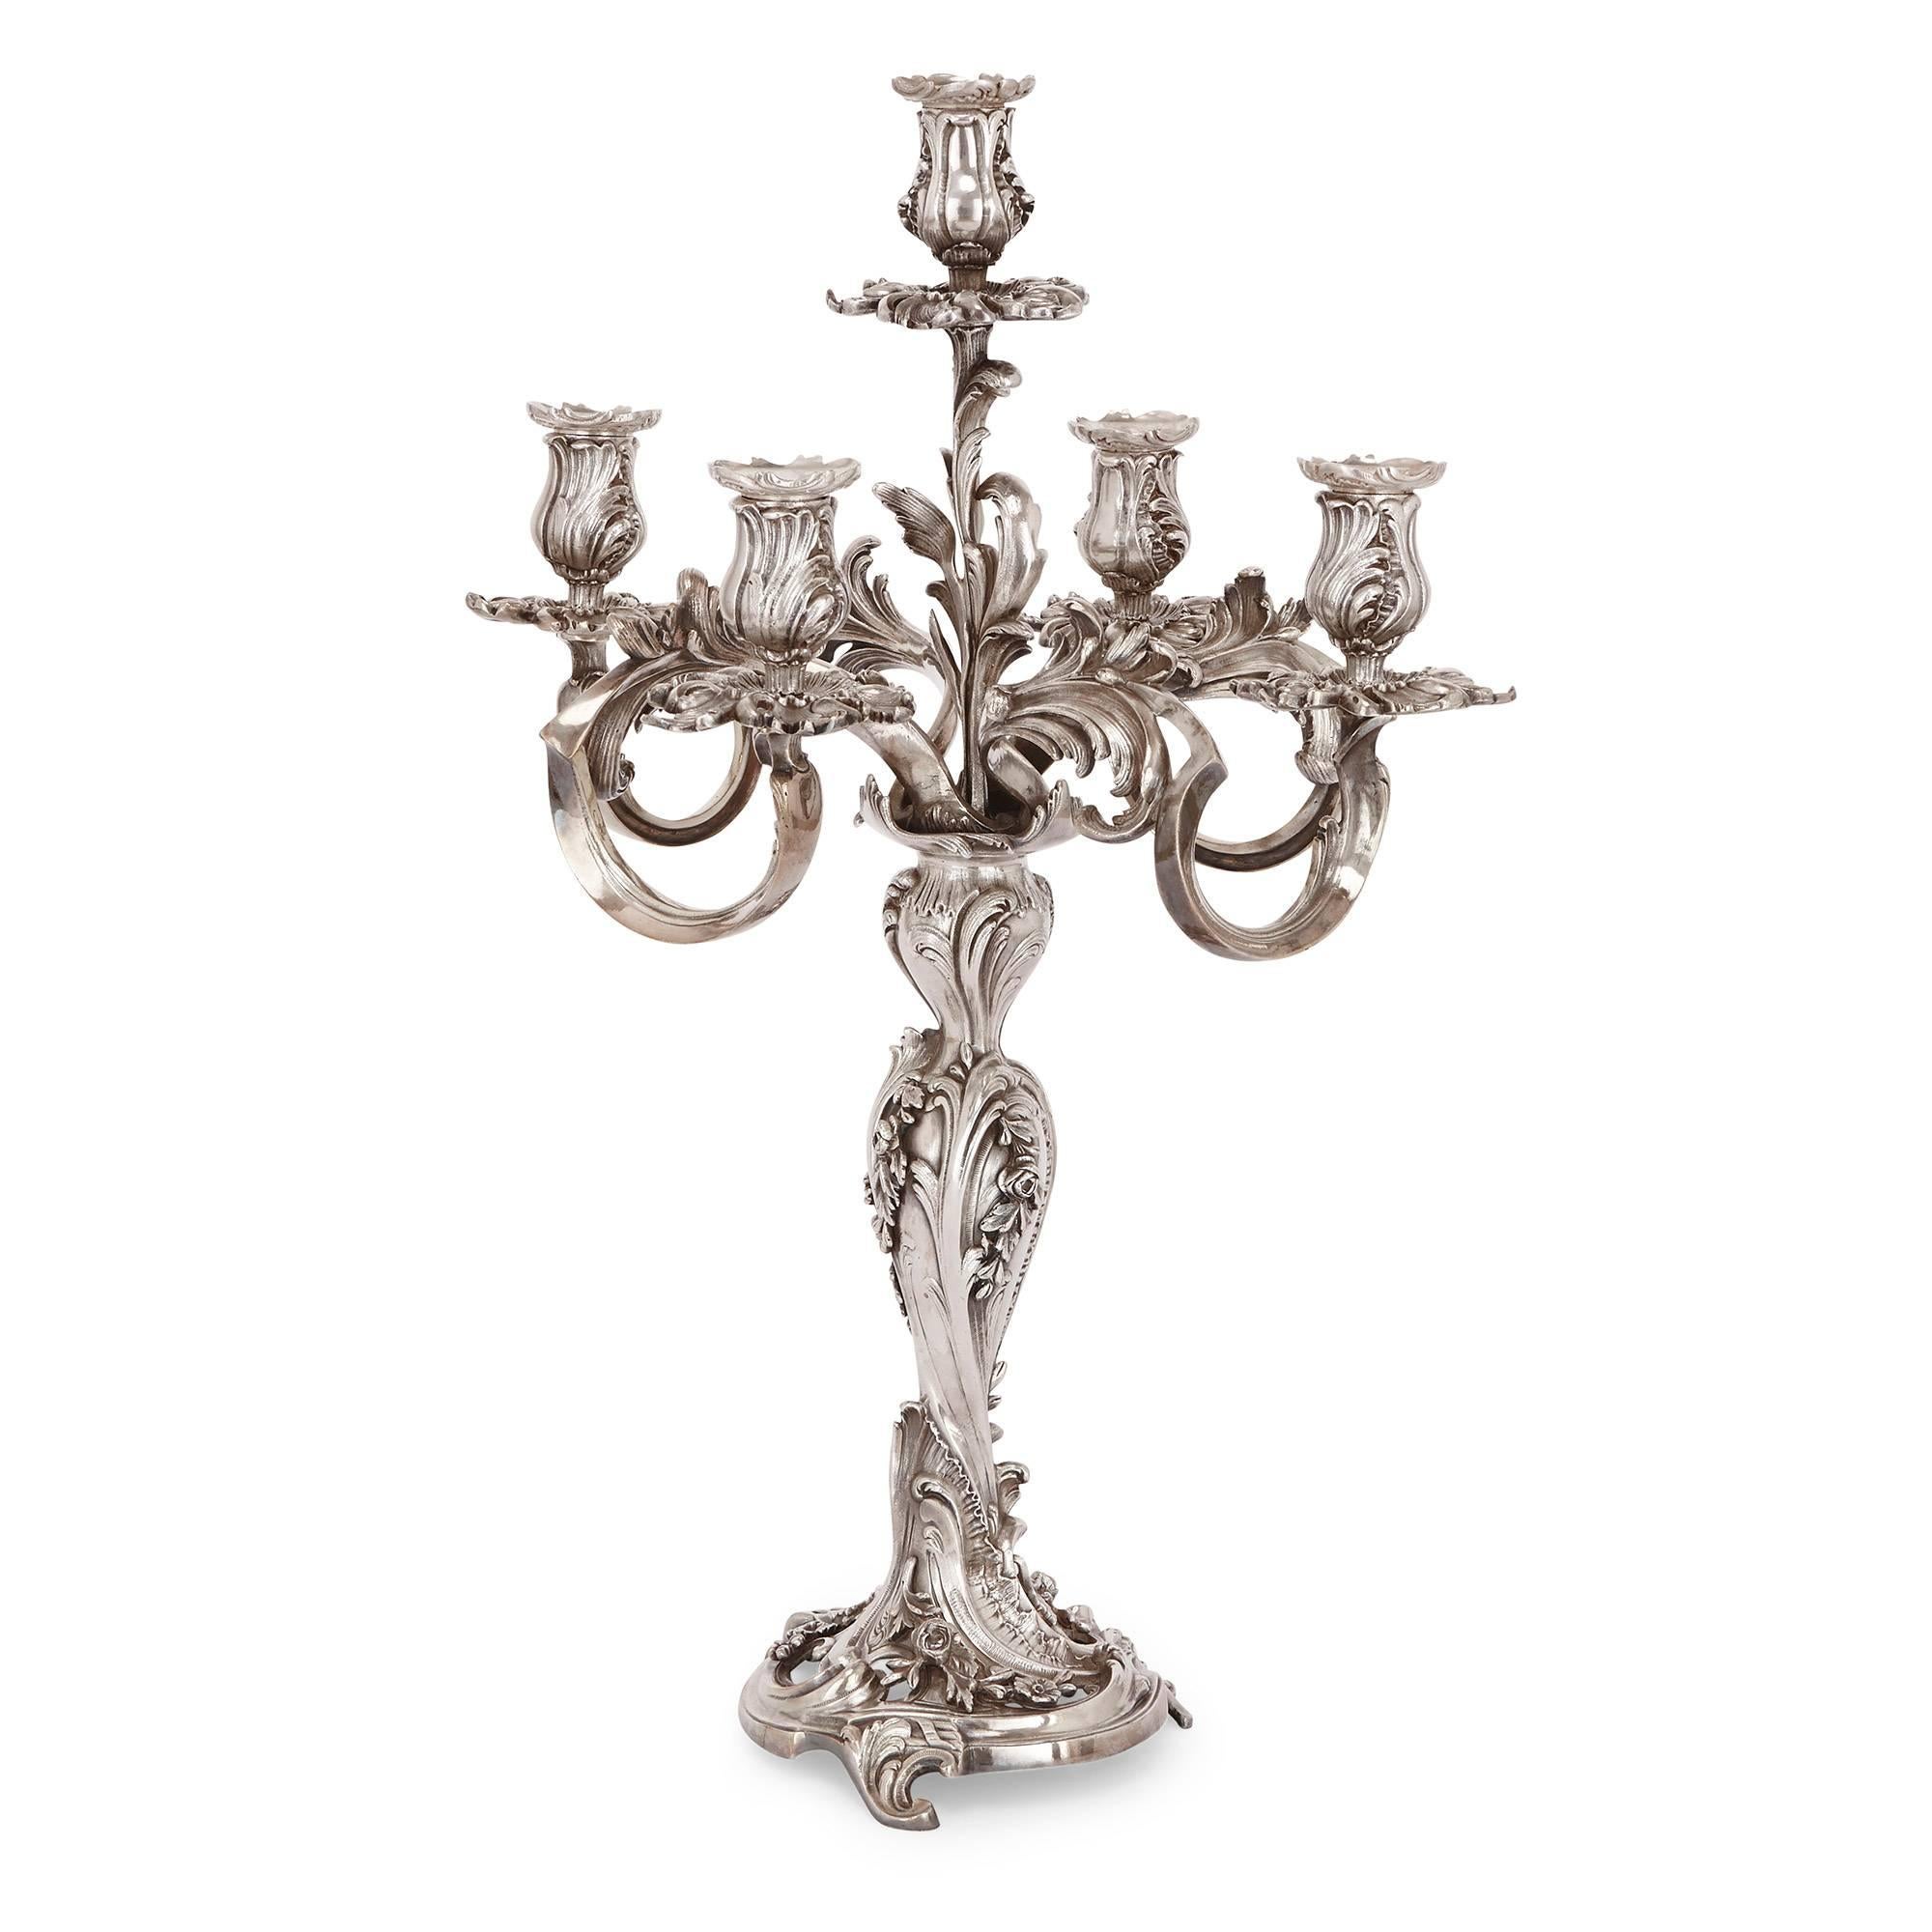 This pair of French antique candelabra are cast entirely in fine, silvered bronze in the Rococo style. They each stand on a circular base with curled feet and floral ornamentation, leading to a bulbous central column intricately worked with stylized